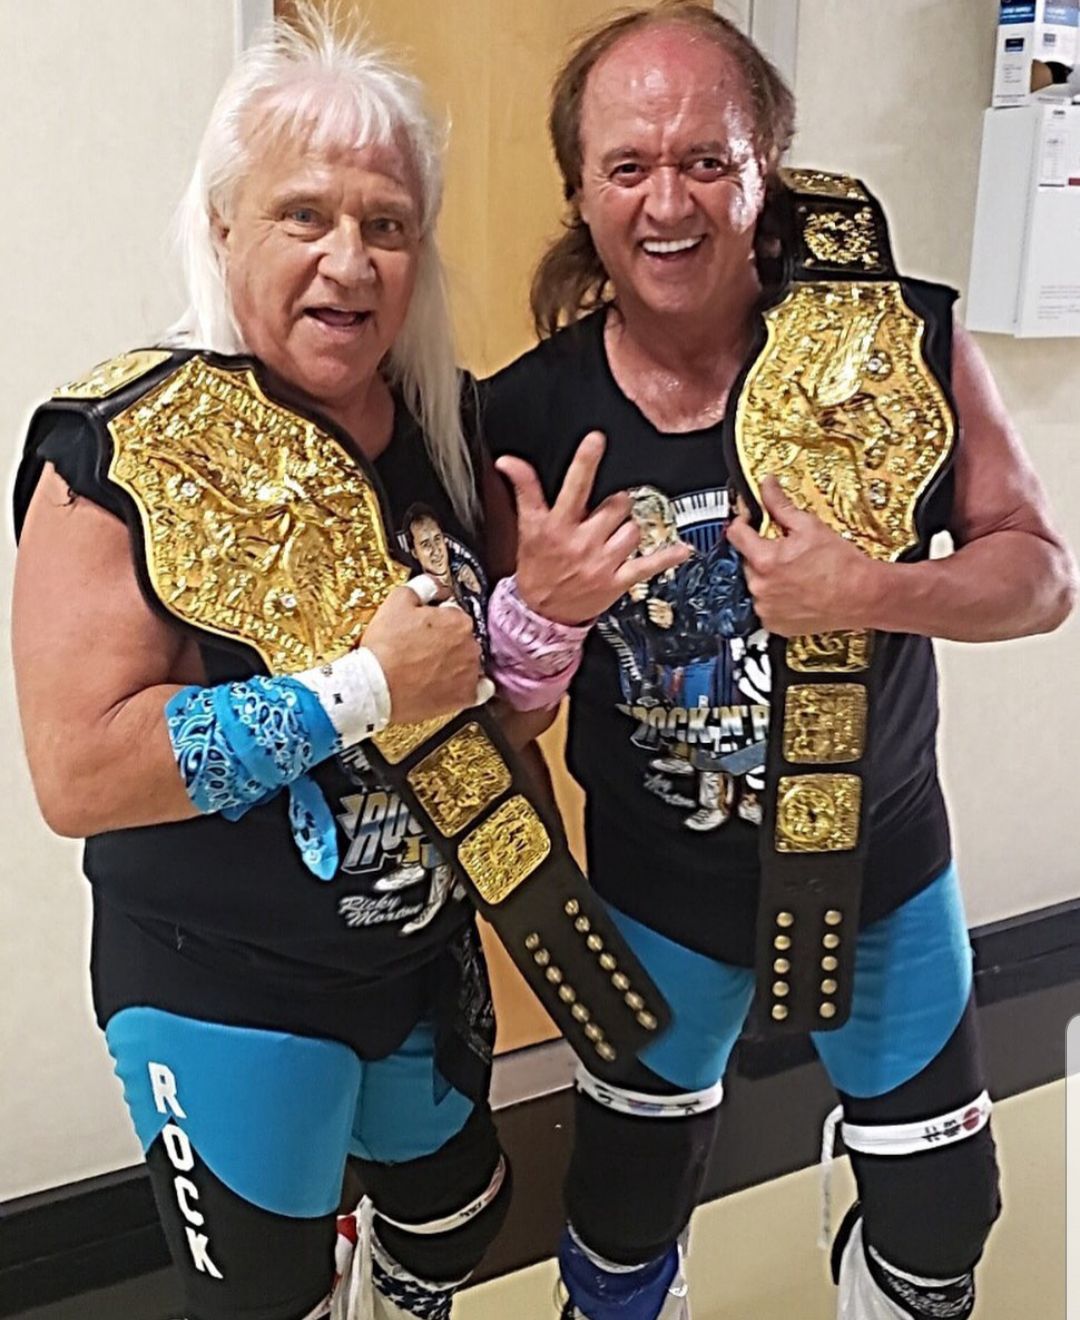 Wrestling's Rock 'n' Roll Express tag team is here to stay | Wrestling |  postandcourier.com